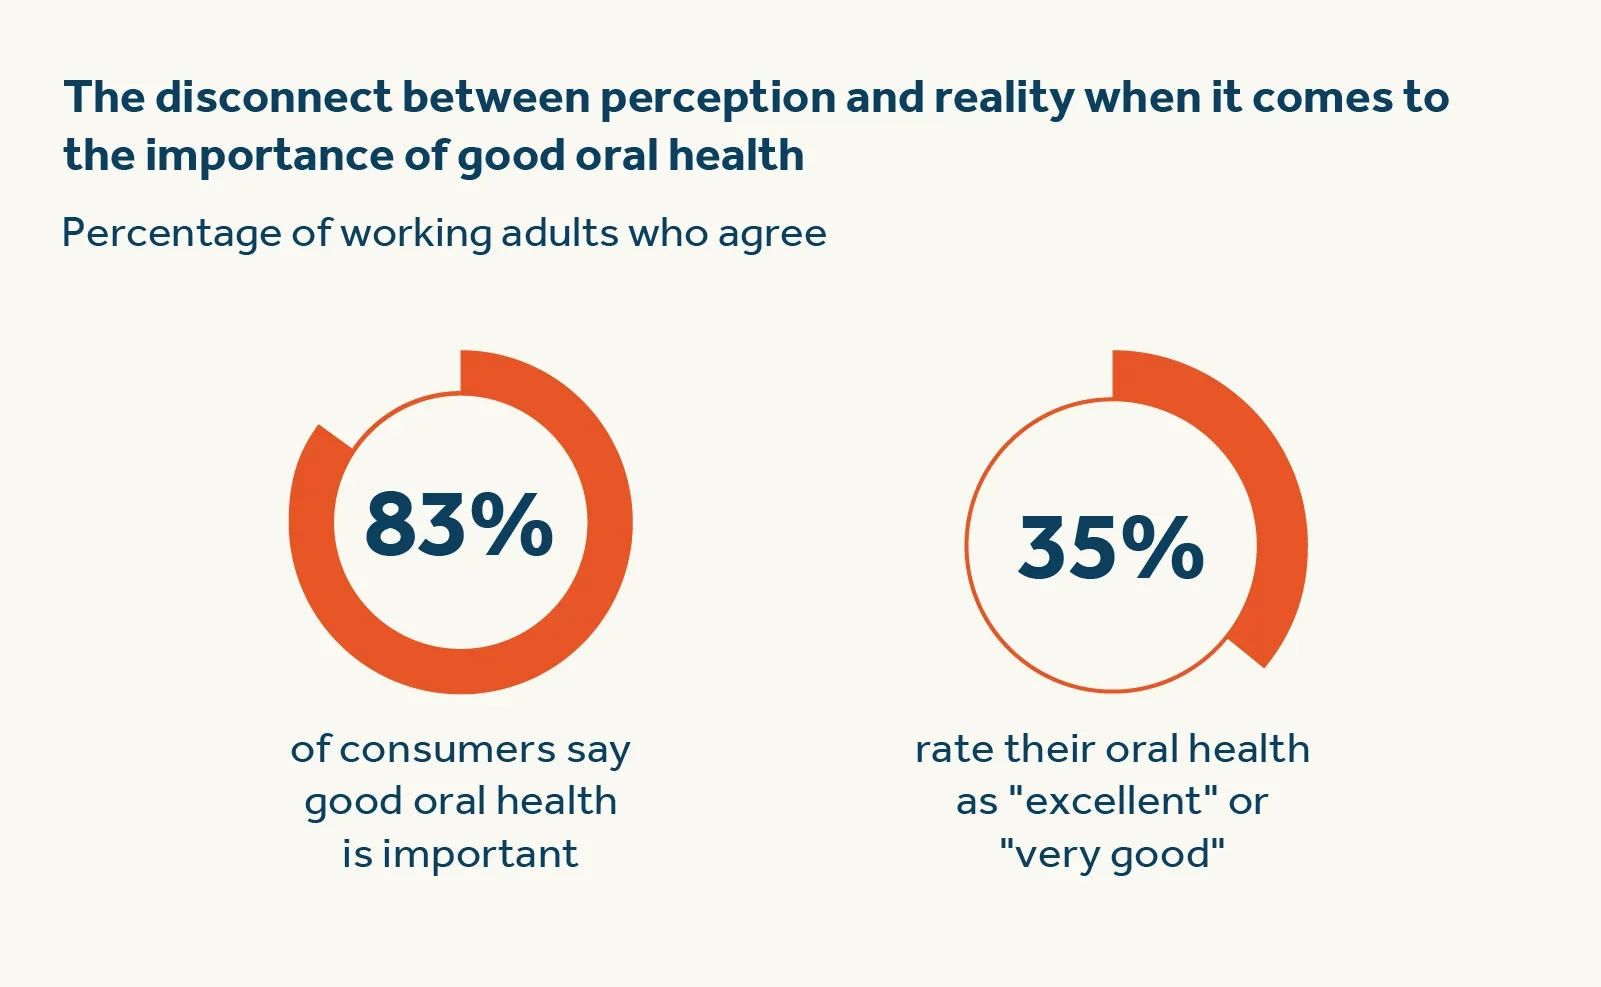 Disconnect between perception and reality when it comes to the importance of good oral health  [Circle chart]  83% of consumers say that good oral health is important.  35% of consumers rate their oral health as excellent or very good.